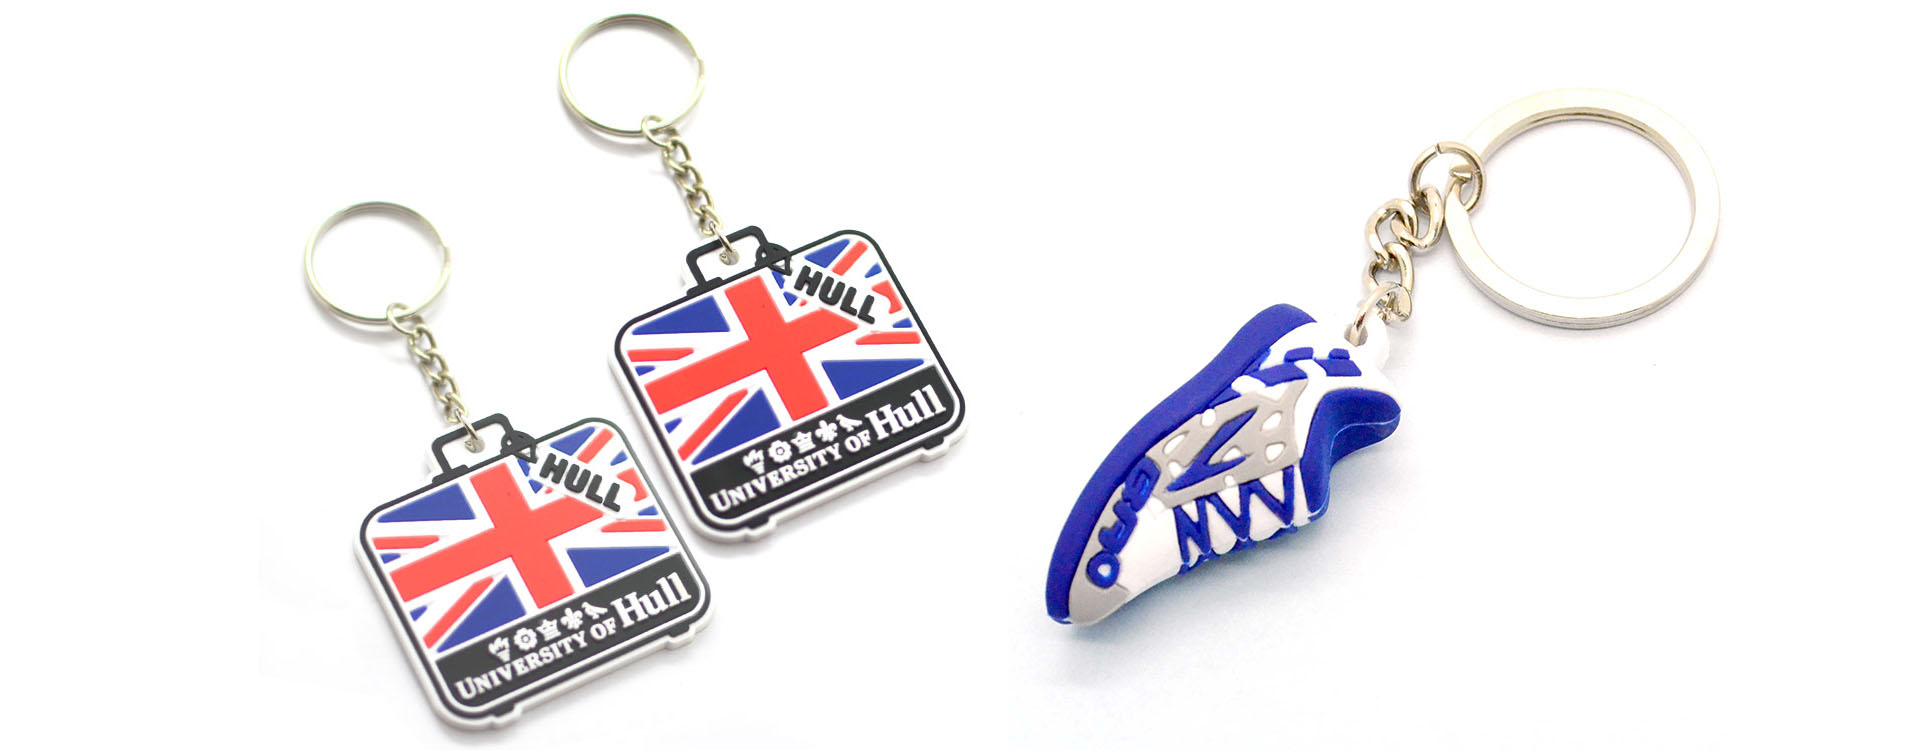 ArtiGifts: Elevate Your Brand with High-Quality 3D Soft PVC Keychains